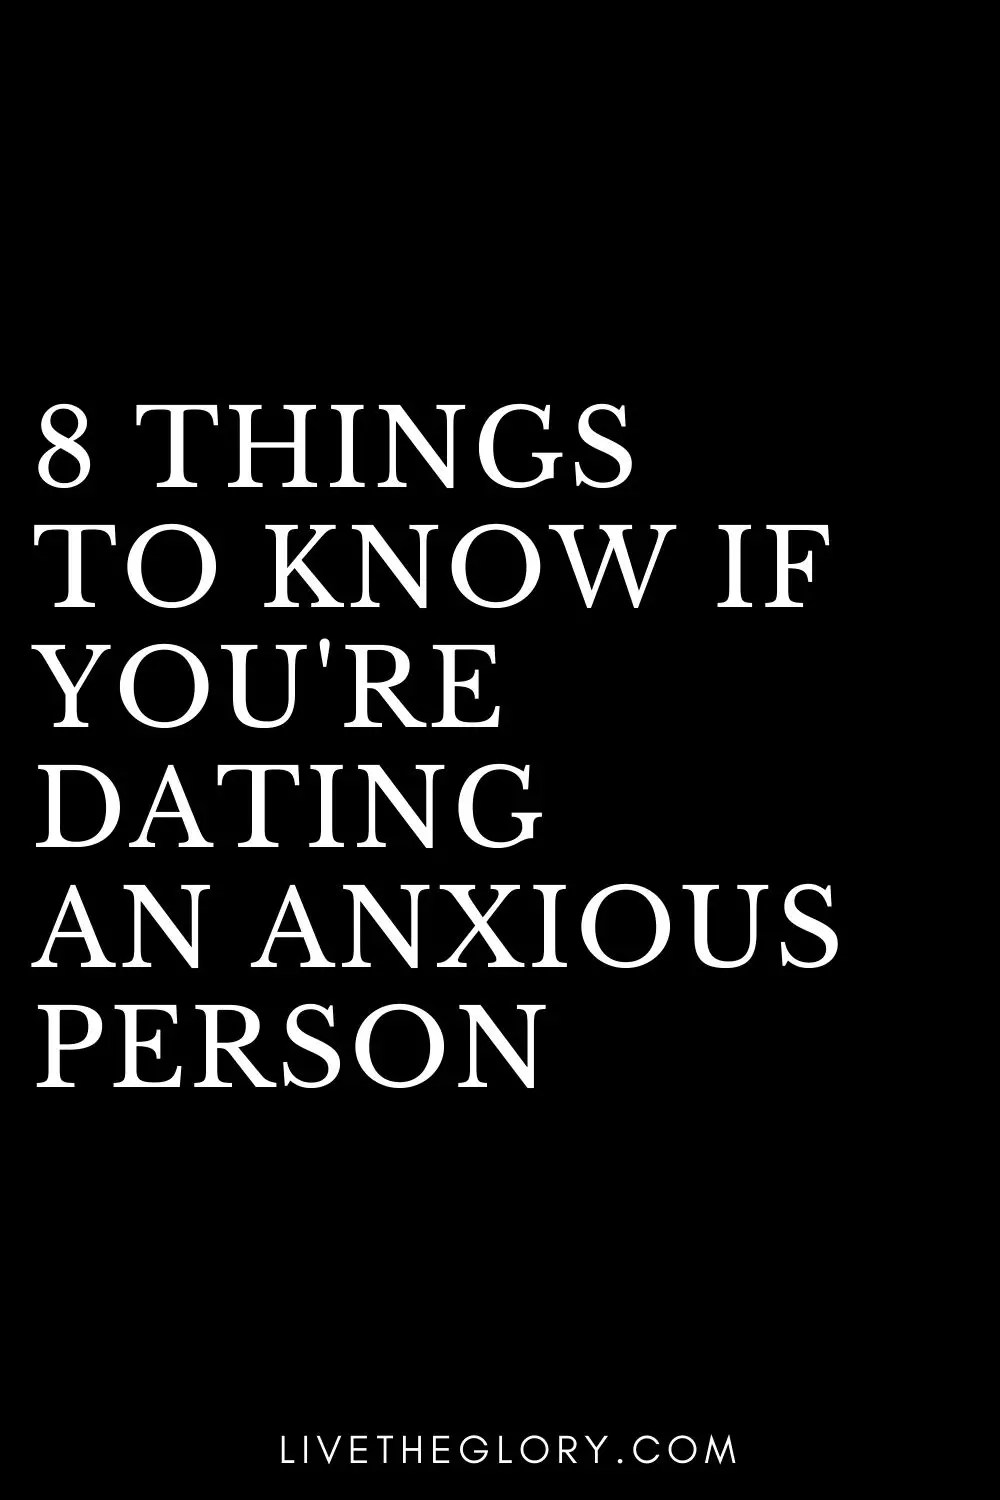 8 things to know if you're dating an anxious person - Live the glory